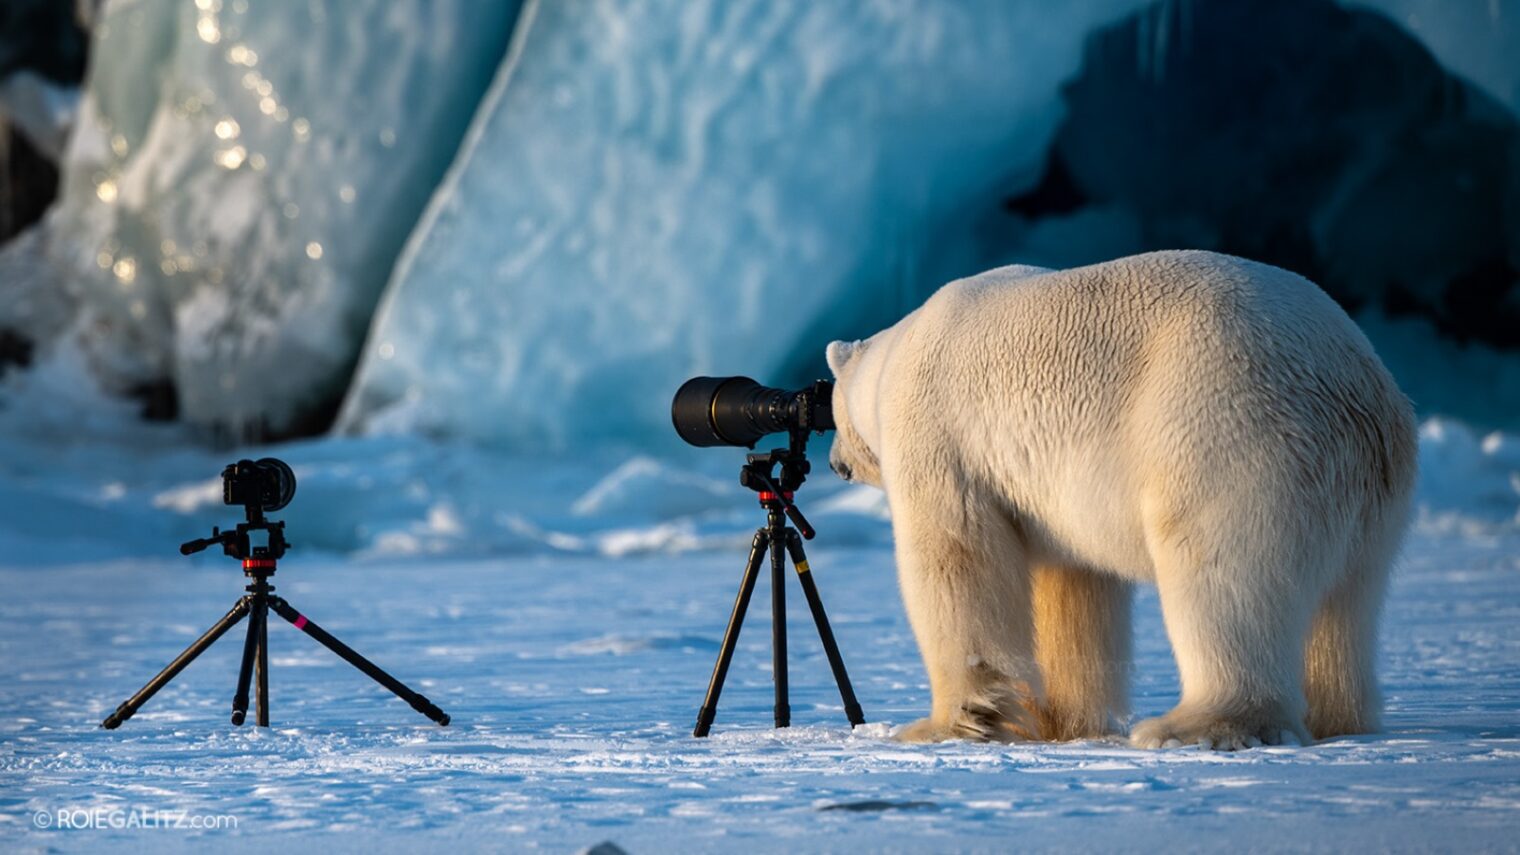 “Wildlife PhotograBear” by Roie Galitz was “highly commended” in the 2018 Comedy Wildlife Photography Awards. Photo courtesy of Roie Galitz